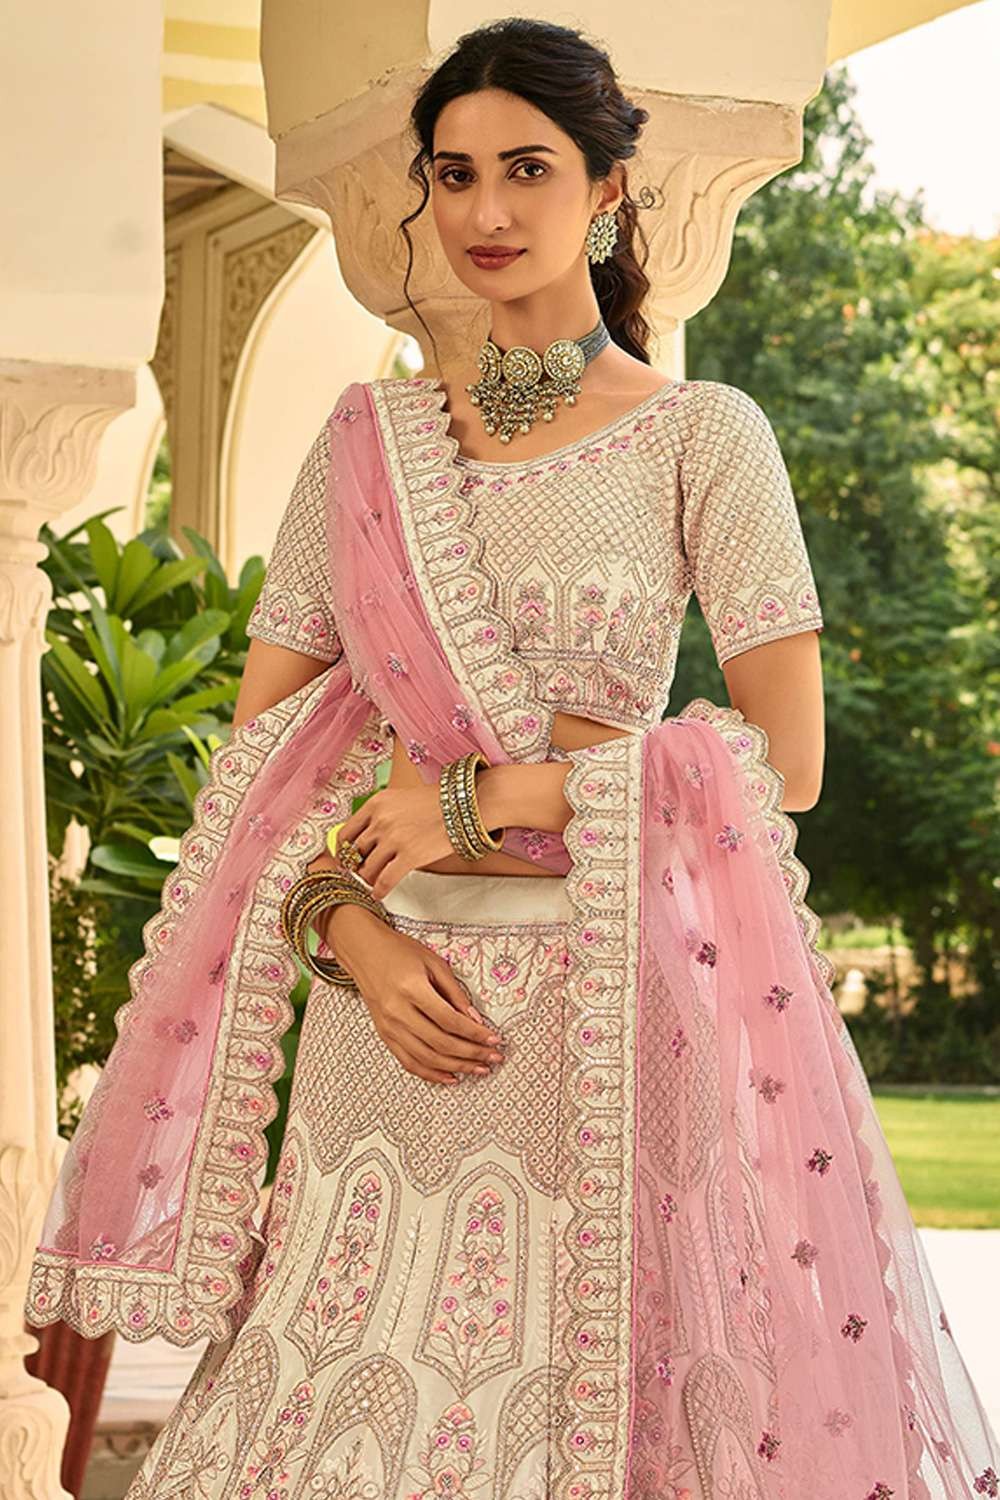 Bridal Megenta Pink Hand Embroidered Indian Wedding Lehenga With Floral Jal  Embellished Blouse Paired With Light Pink and Dark Pink Dupatta. - Etsy  Finland